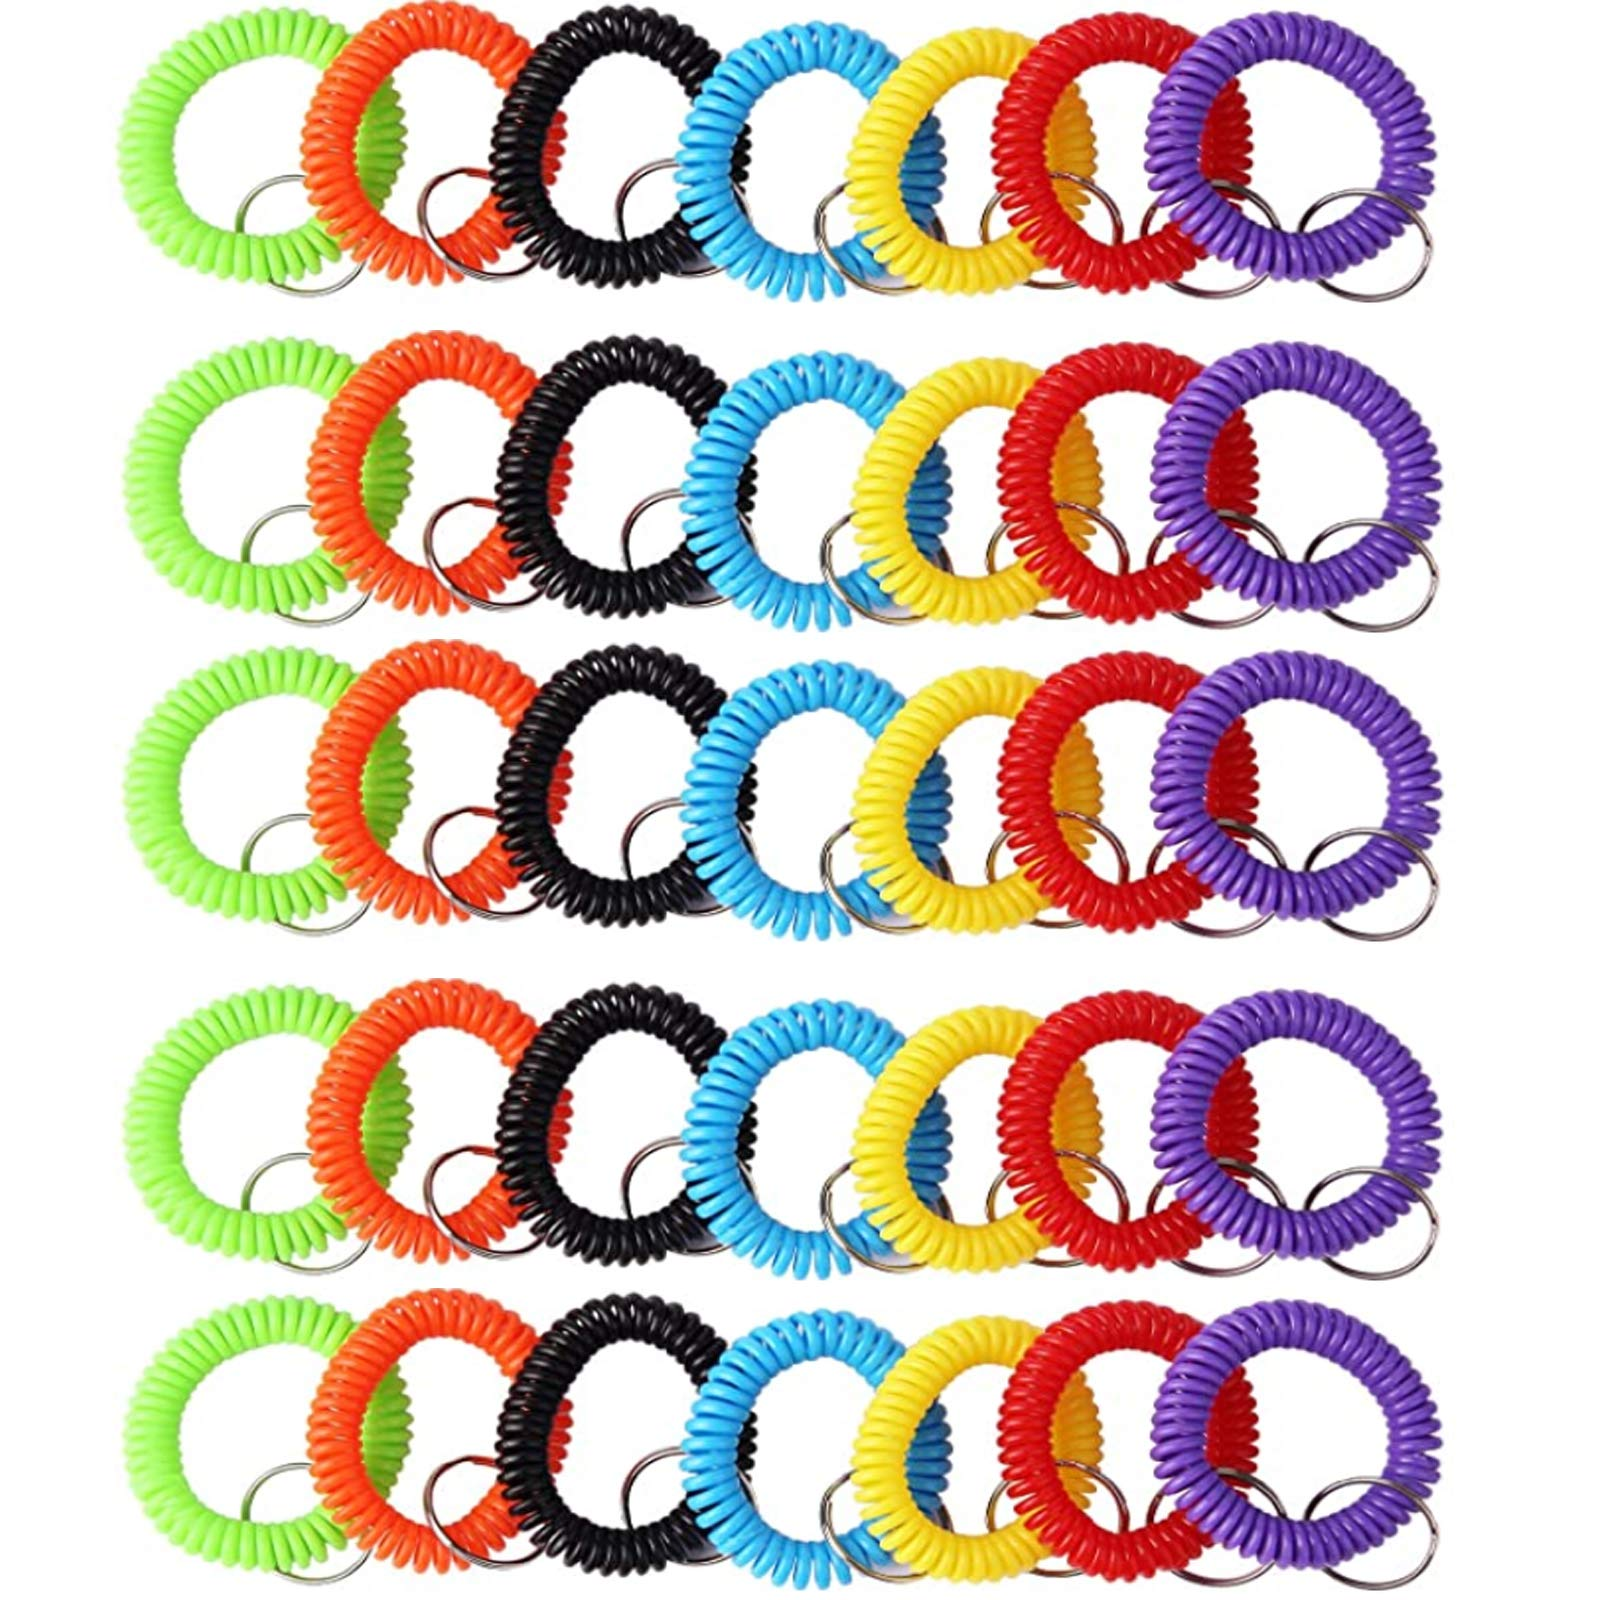 HY-KO Clip-On Coiled Key Ring Assortment KC156 - The Home Depot